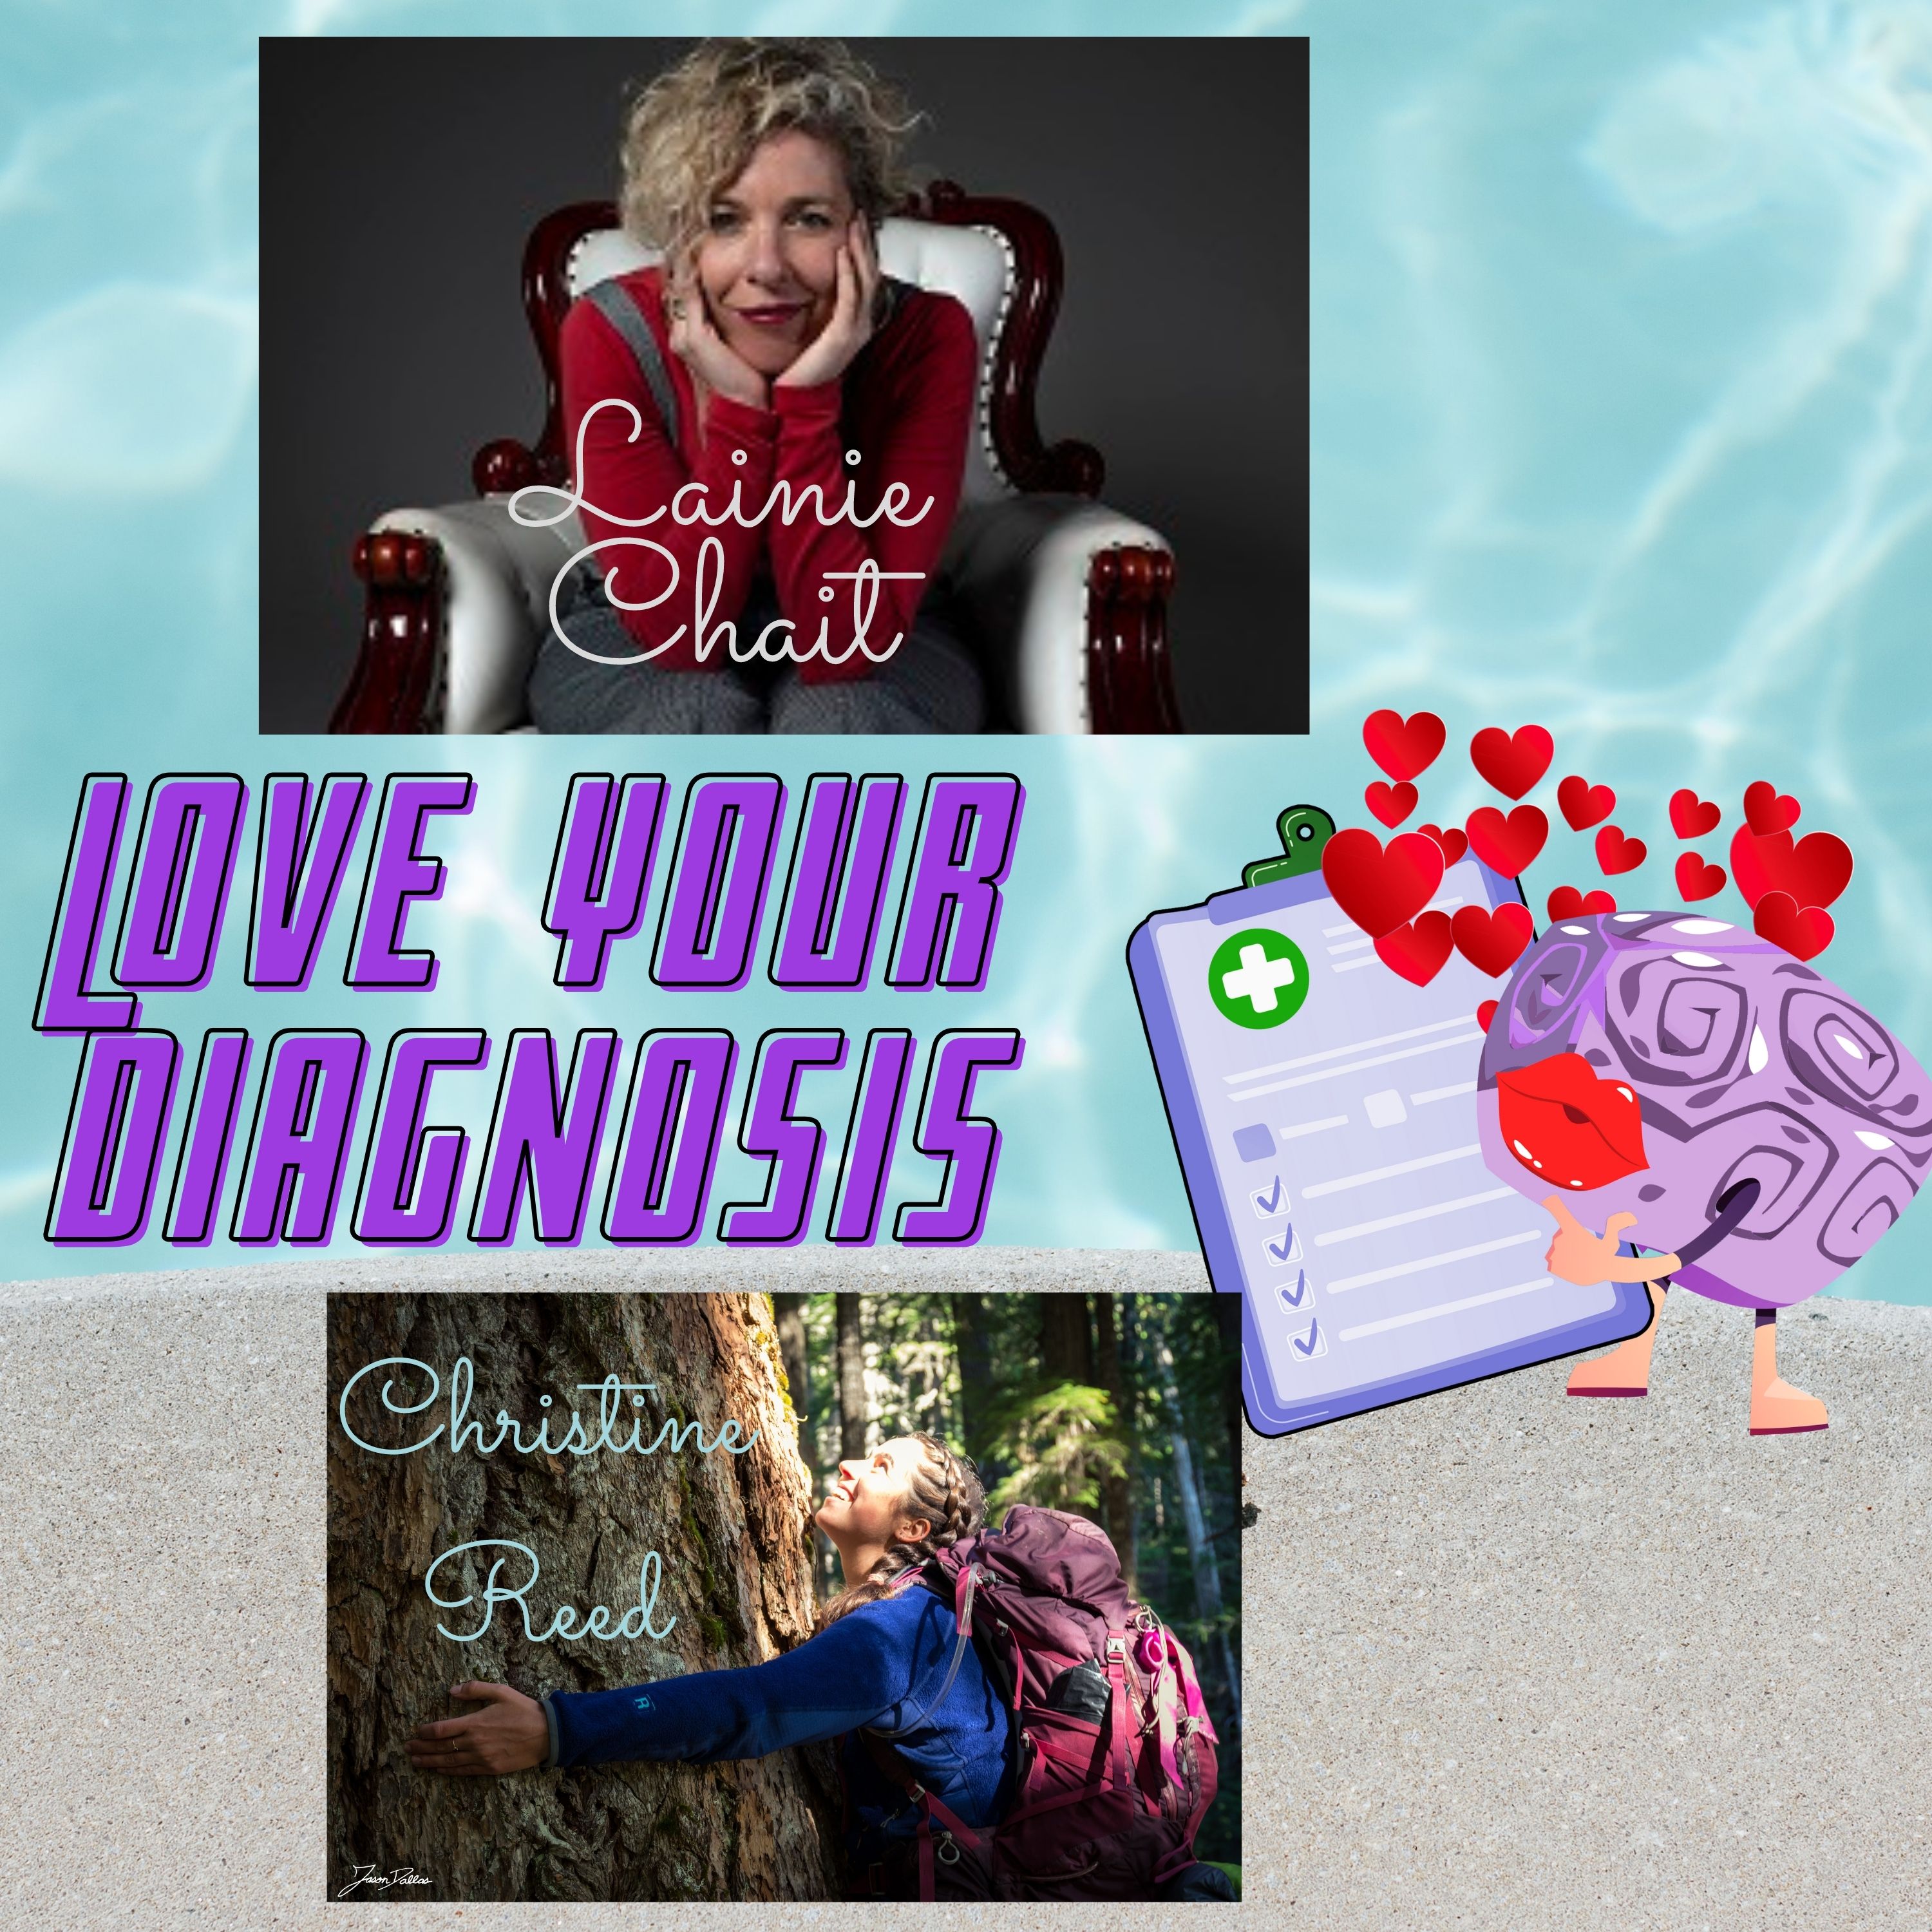 Artwork for podcast Love your Diagnosis